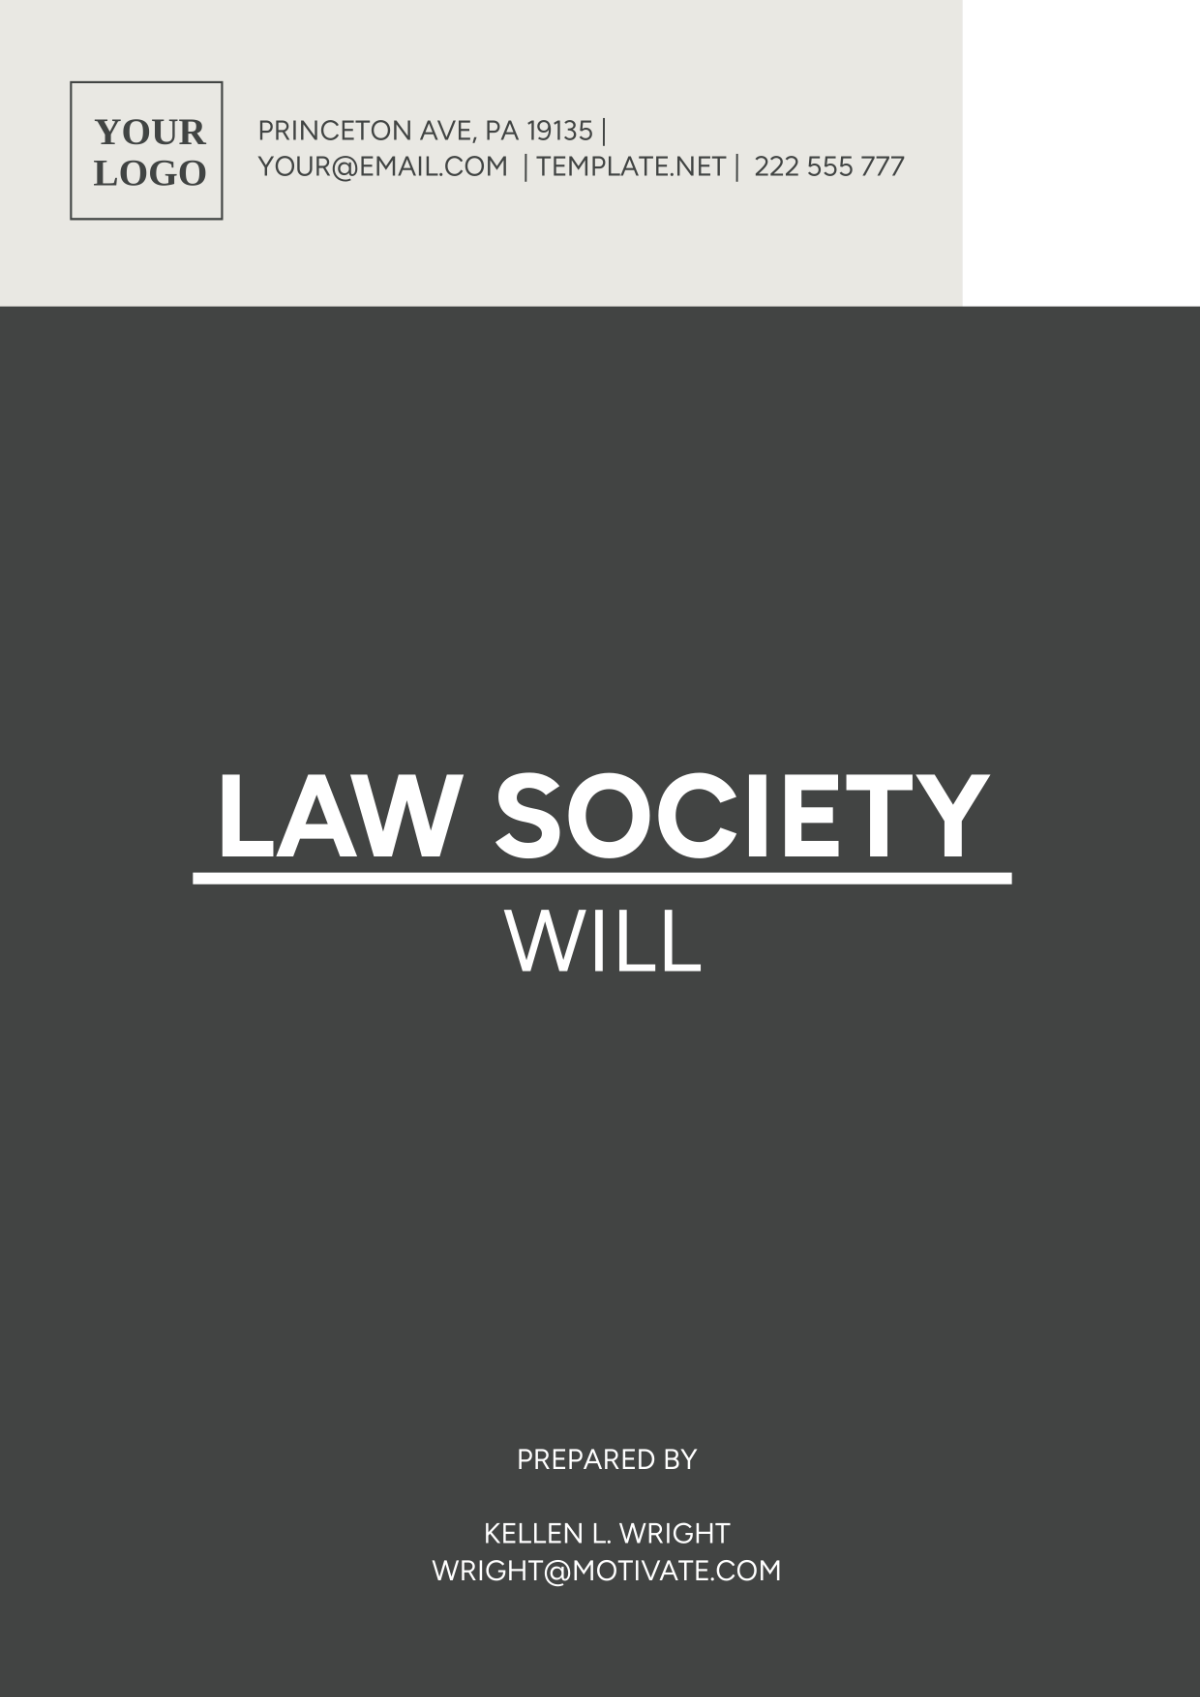 Law Society Will Template